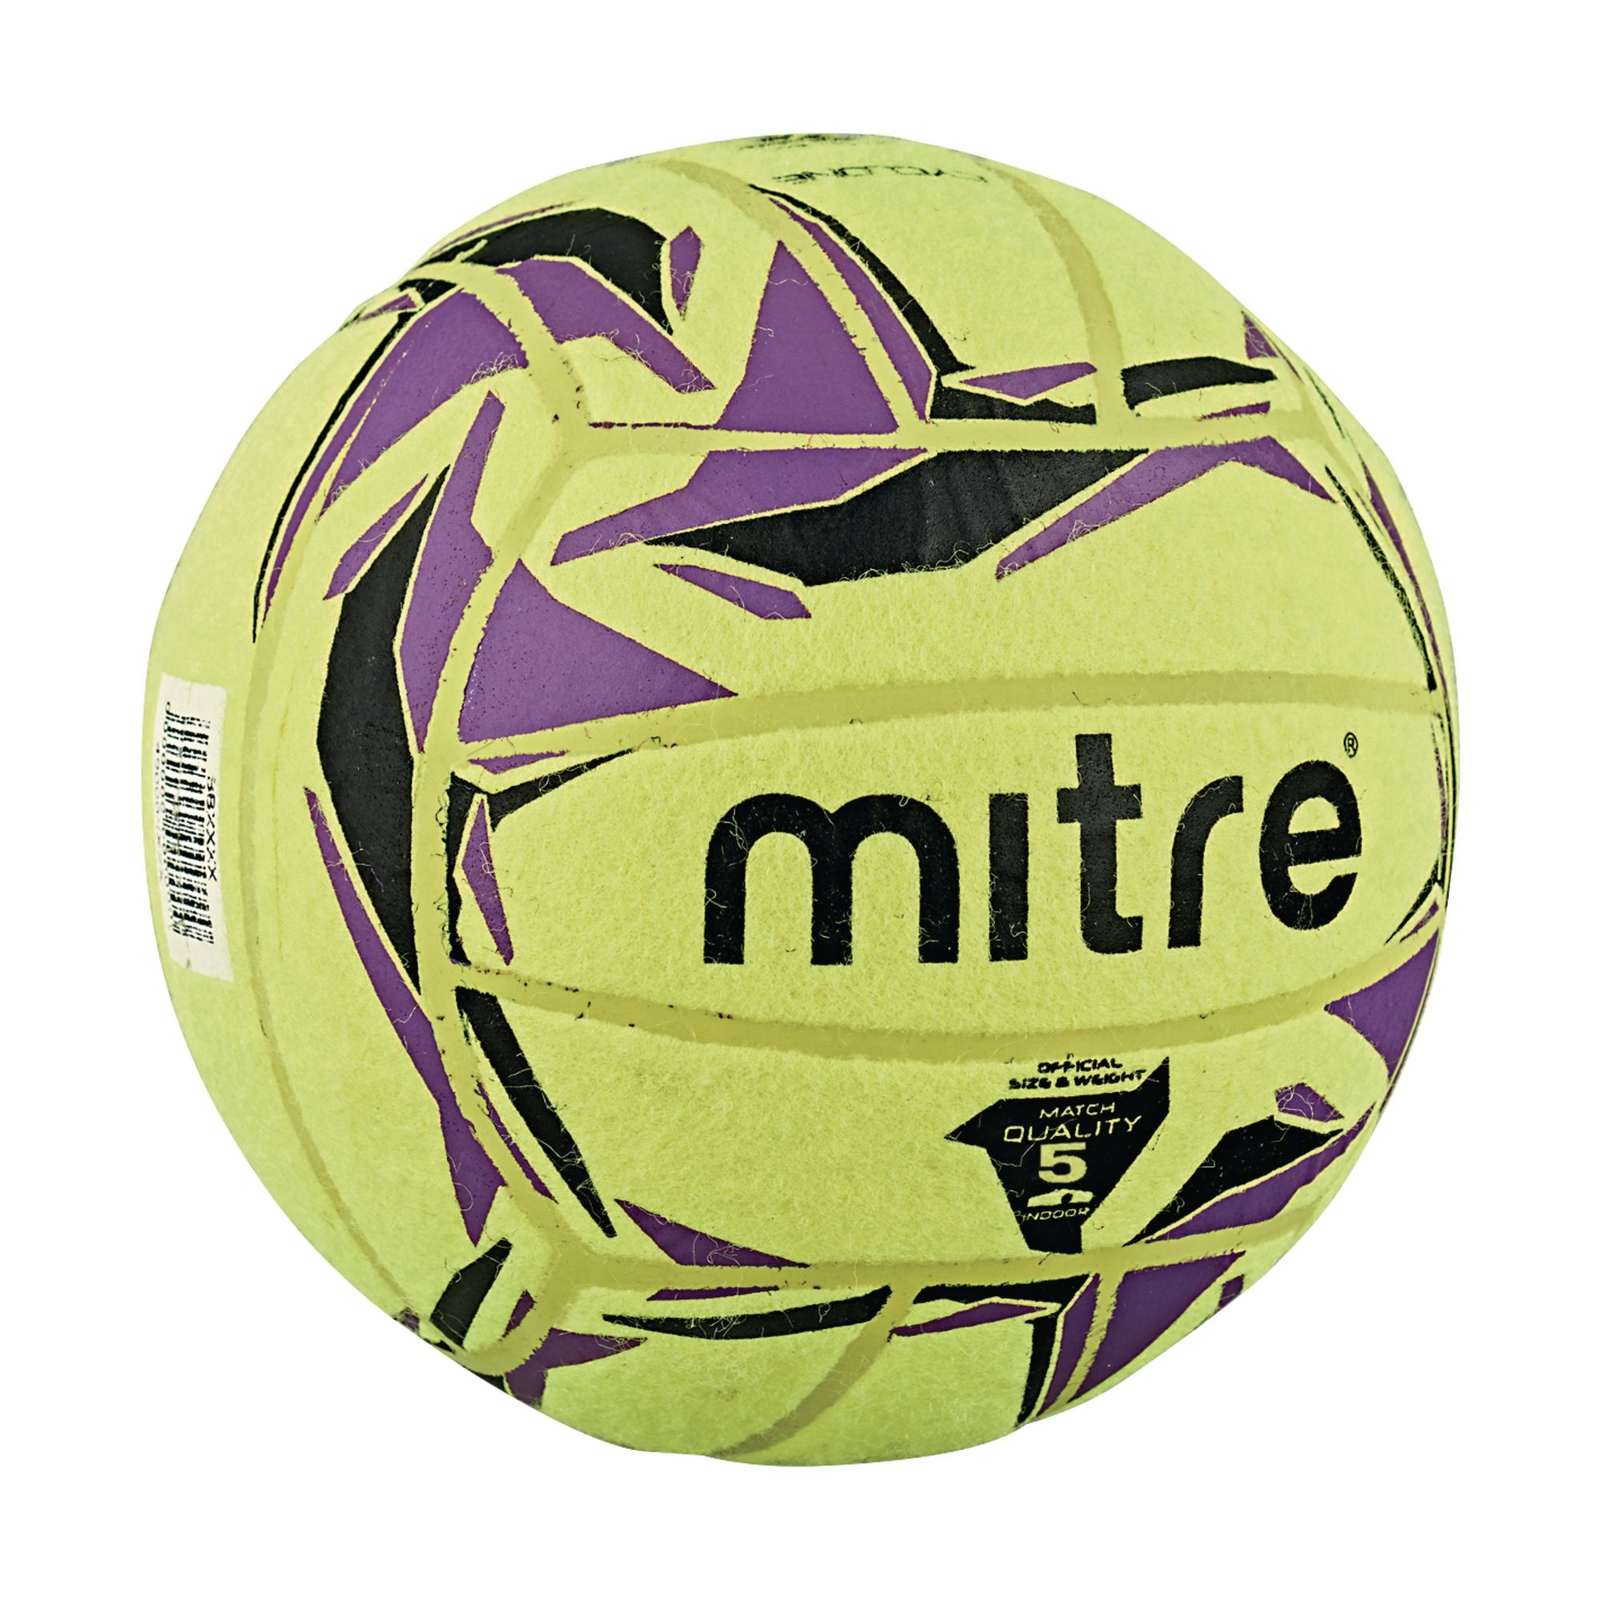 Mitre Cyclone, Yellow - Size 5